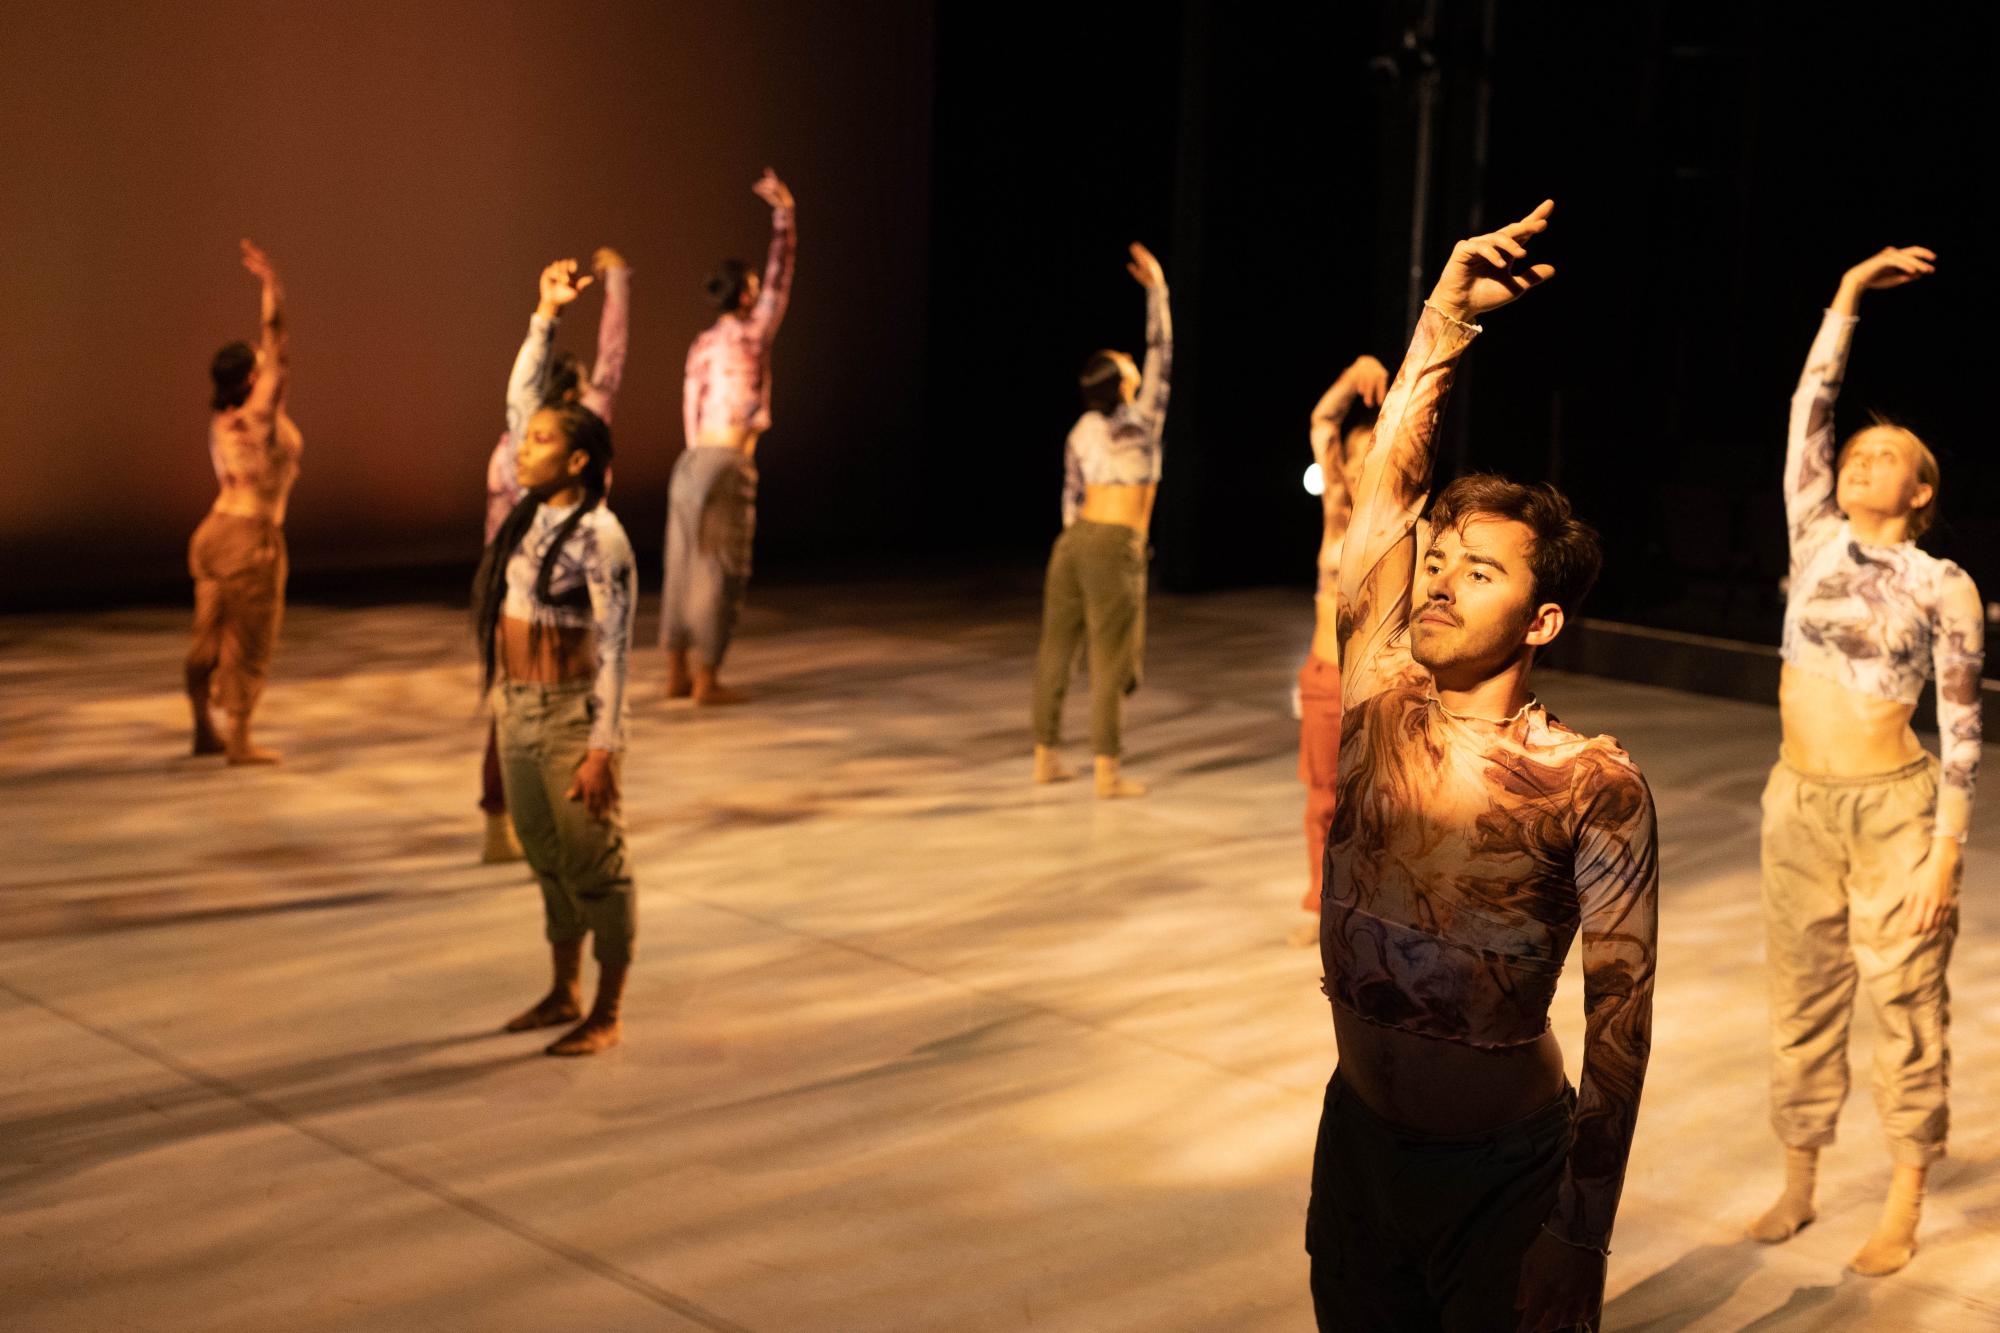 eight dancers stand on stage with their right arms raised, washed in warm, golden stage lighting